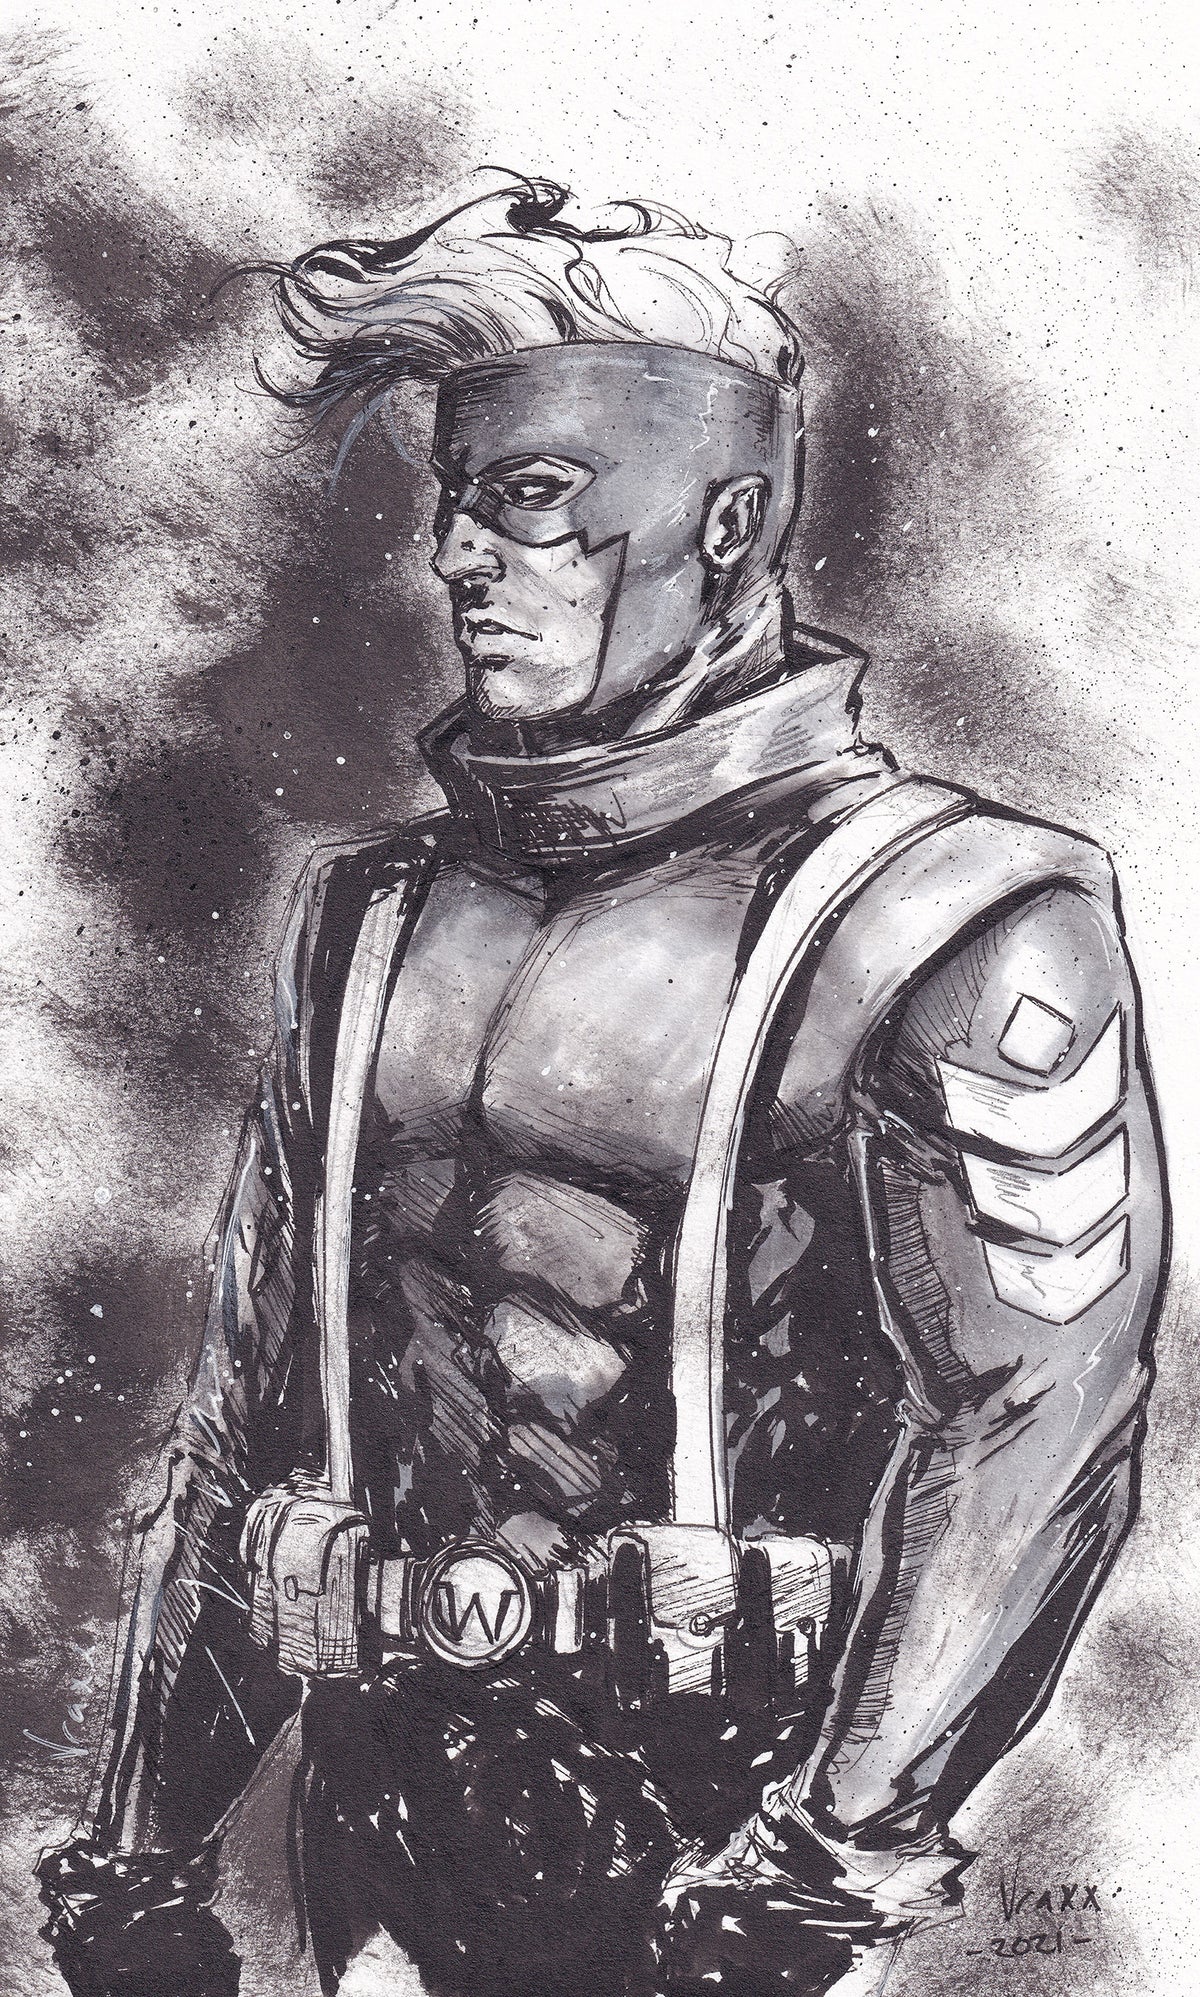 Spartan - 5 1/8" x 8 1/2" - Original Art sold by Stronghold Collectibles